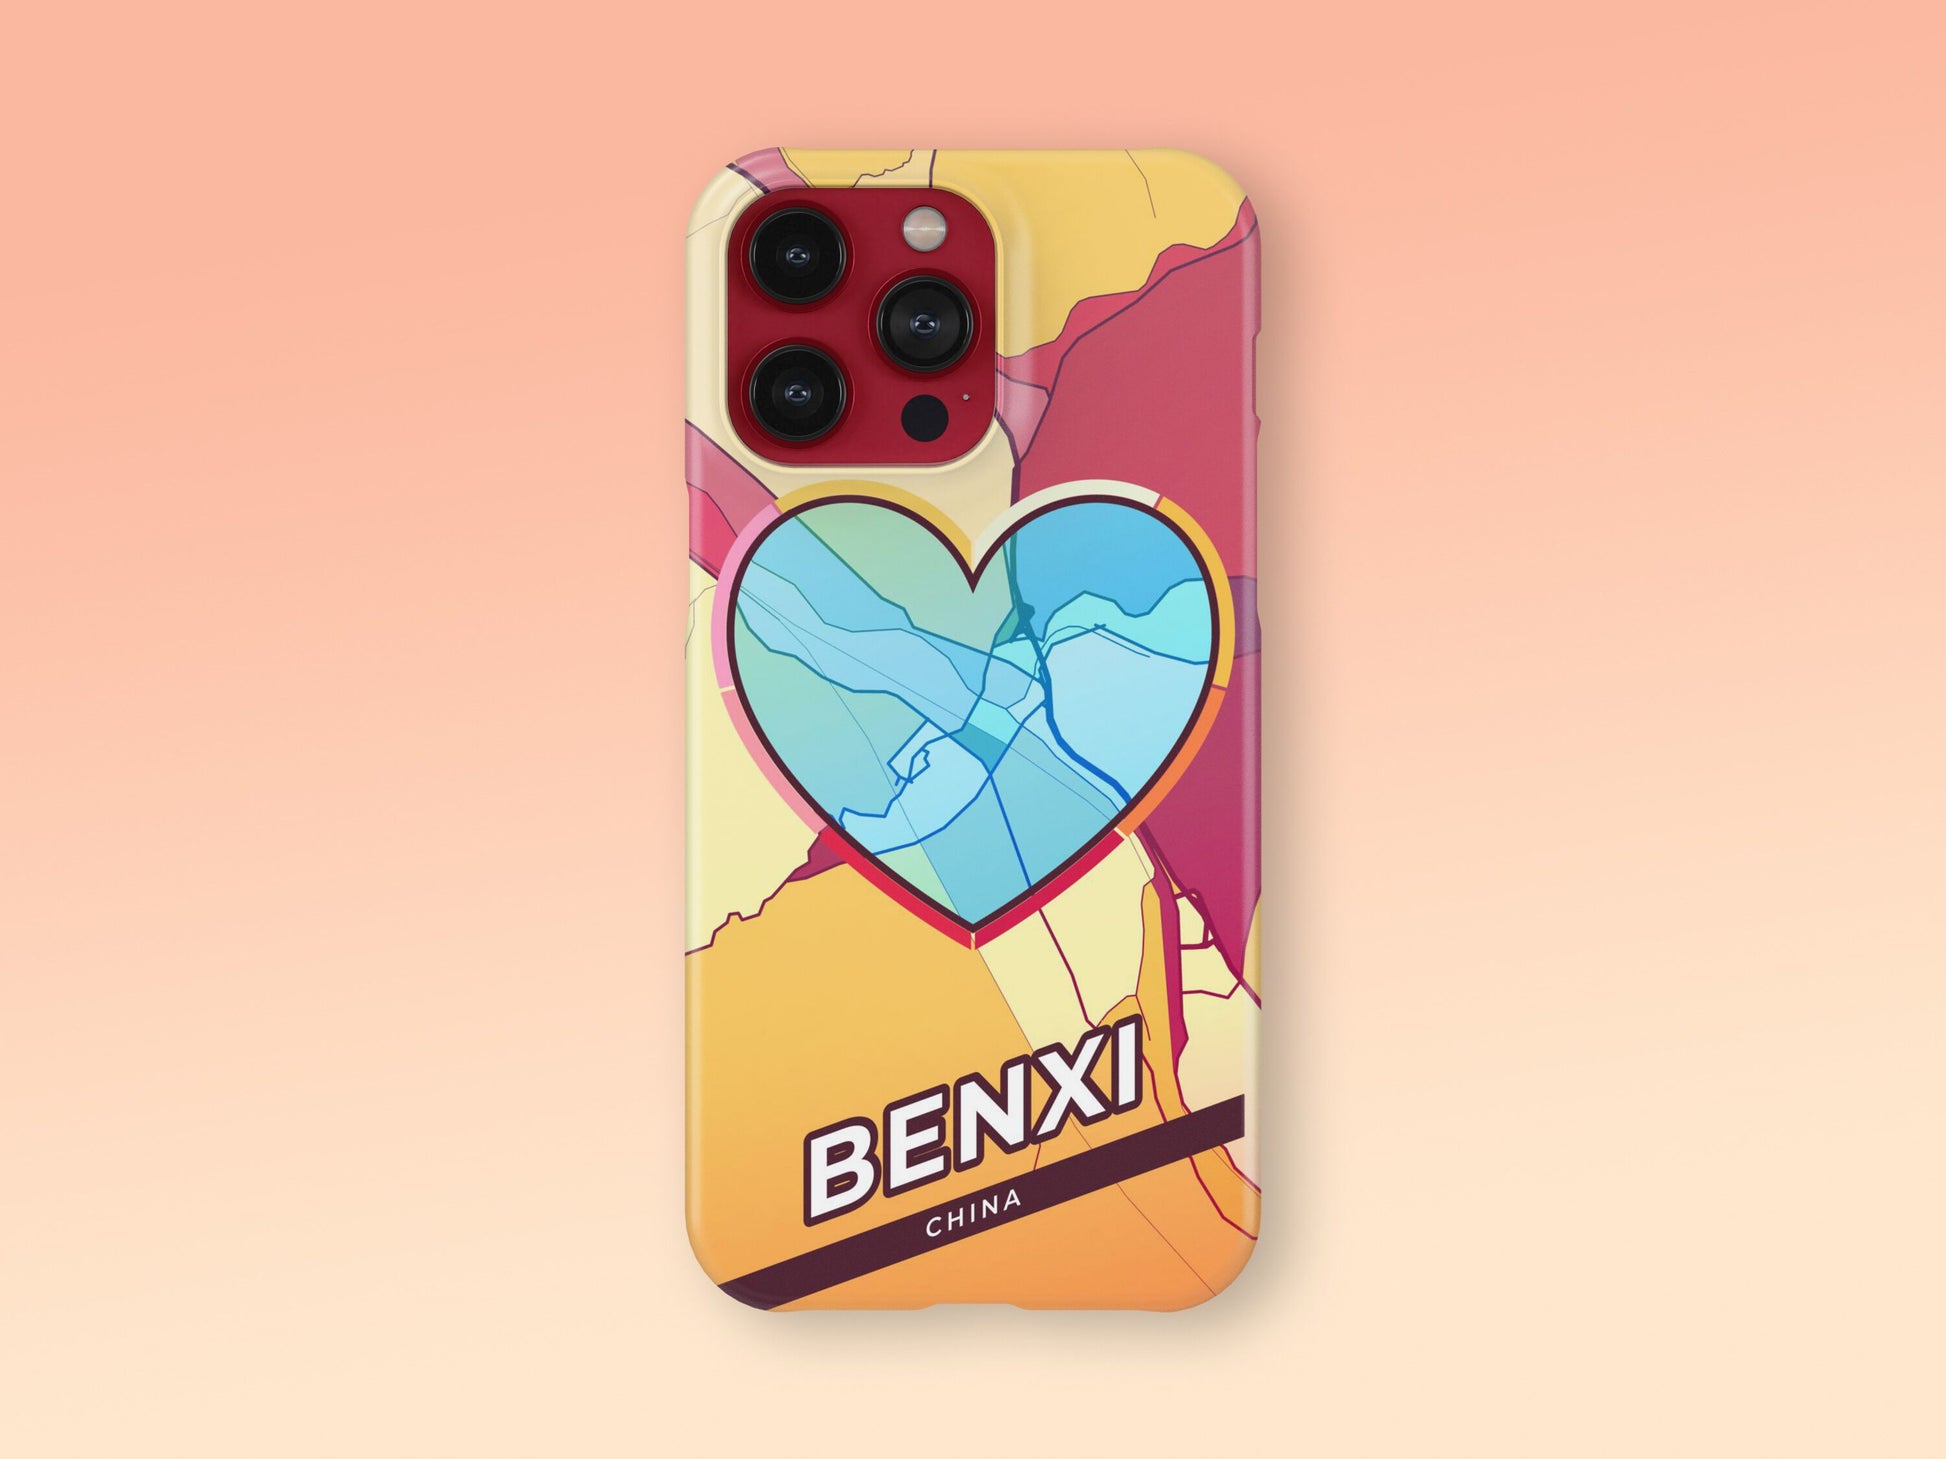 Benxi China slim phone case with colorful icon. Birthday, wedding or housewarming gift. Couple match cases. 2